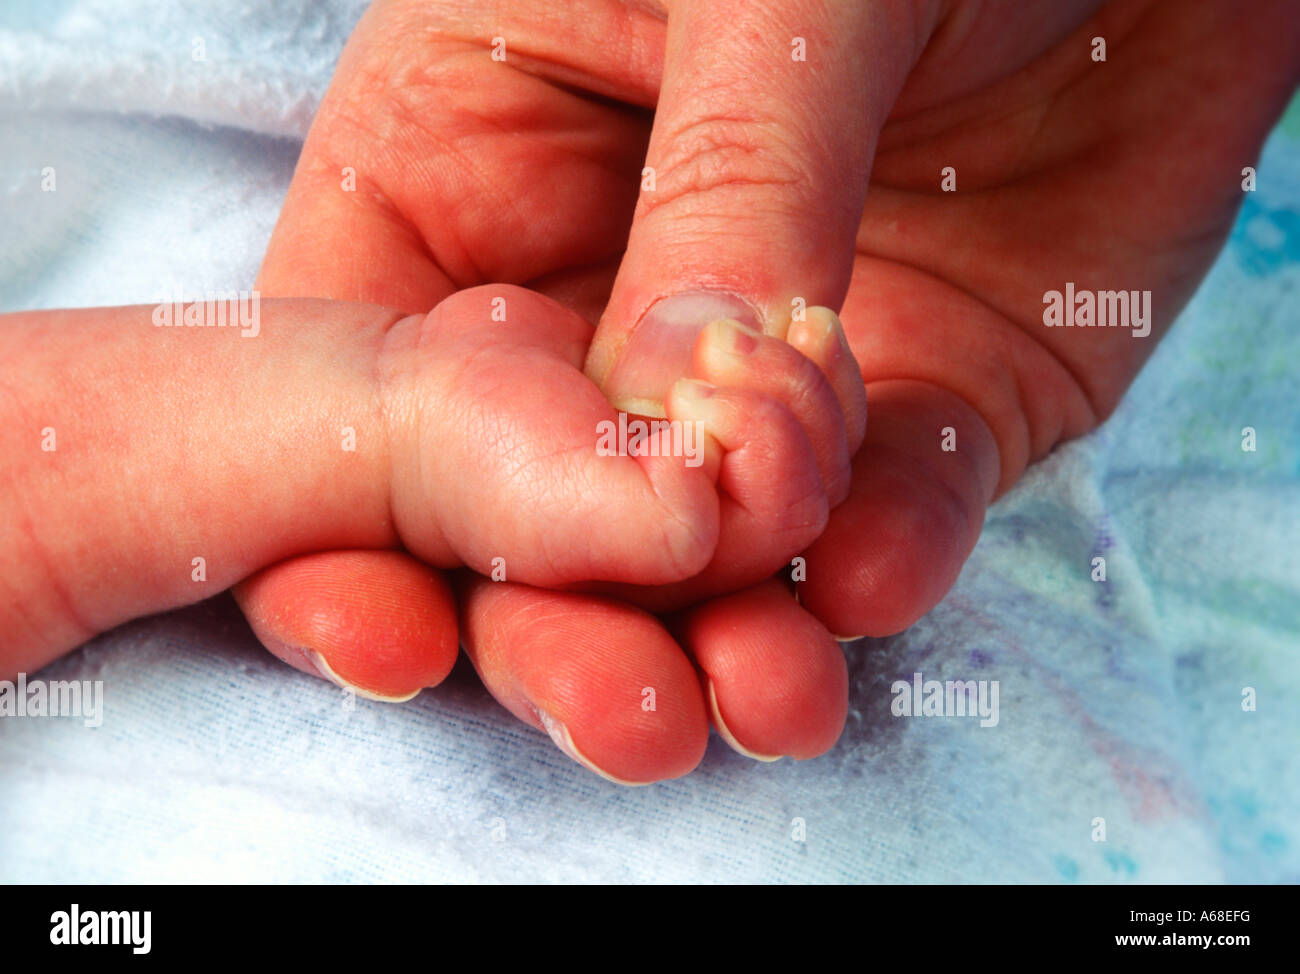 Newborn infant hand in mothers hand Stock Photo